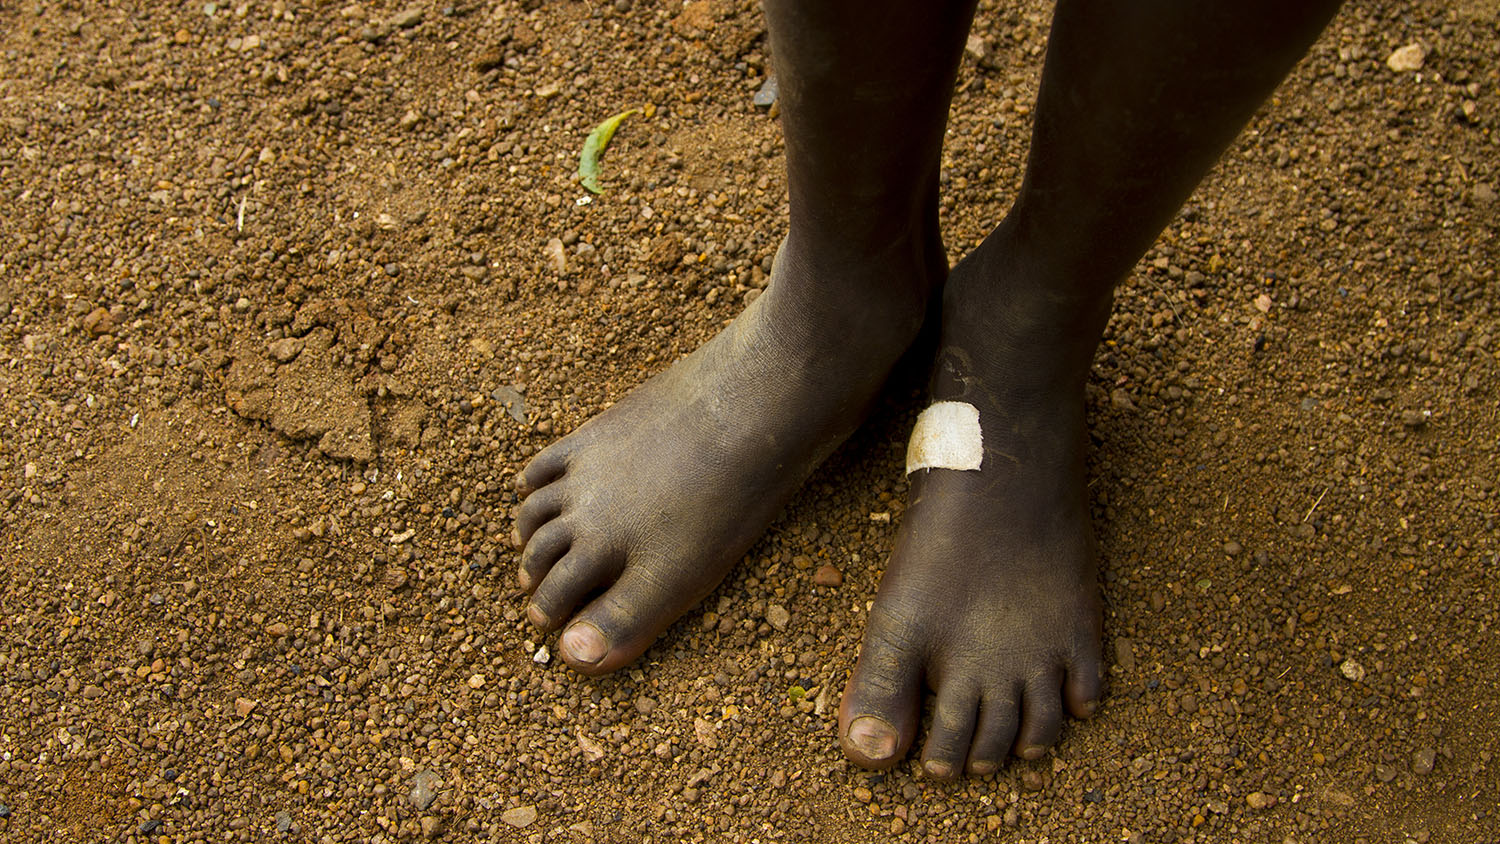 Child's feet, with one foot bandaged.